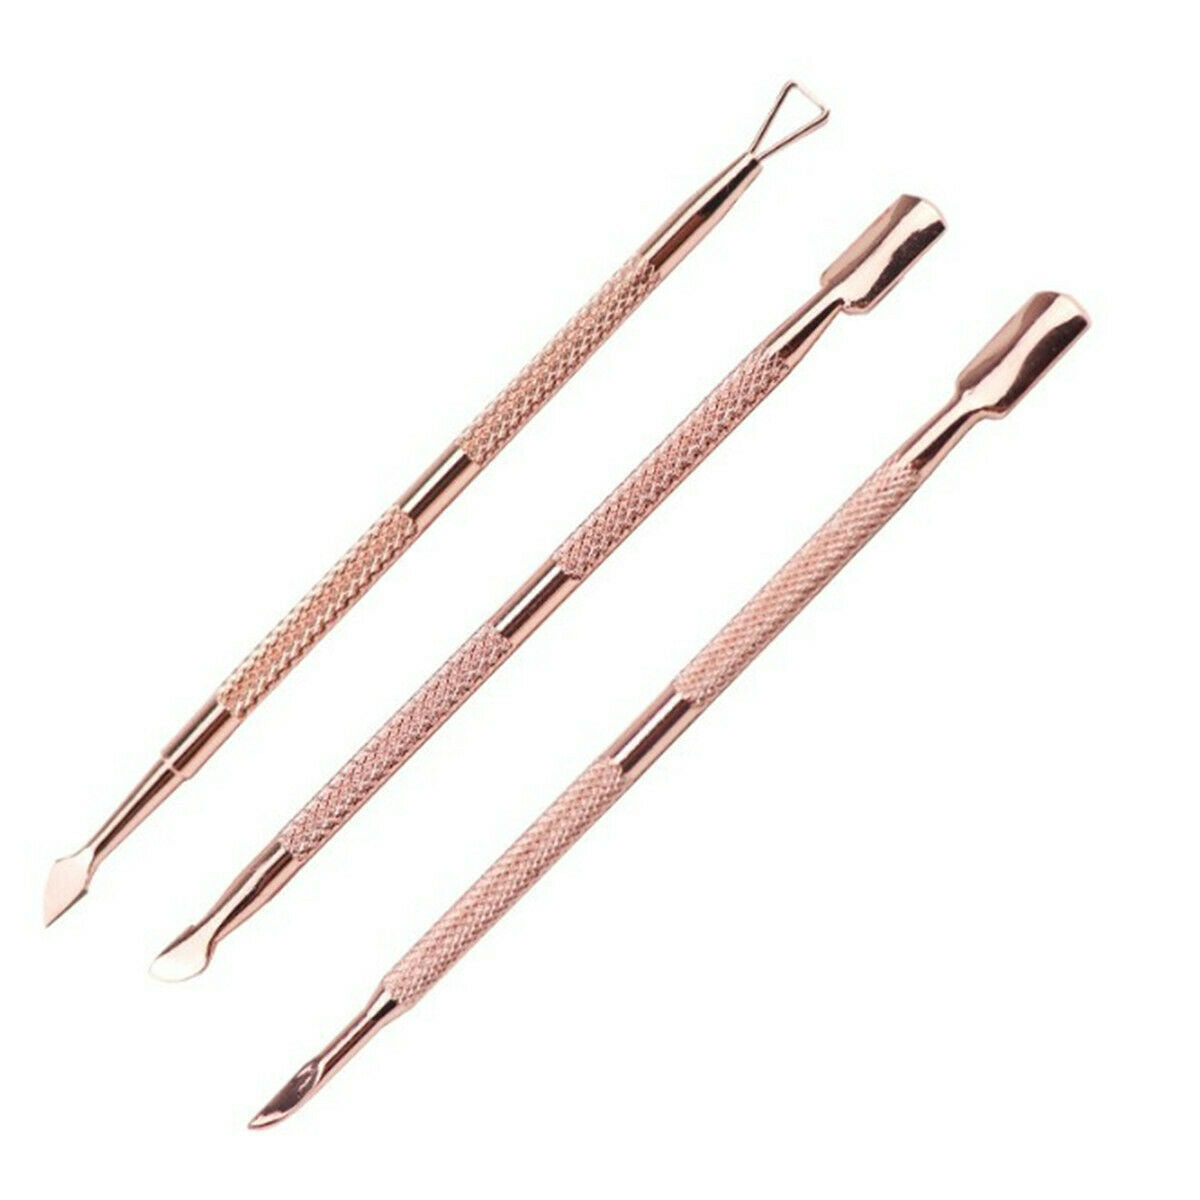 3pcs Nail Art Stainless Cuticle Pusher Remover Spoon Manicure Pedicure Tool Set